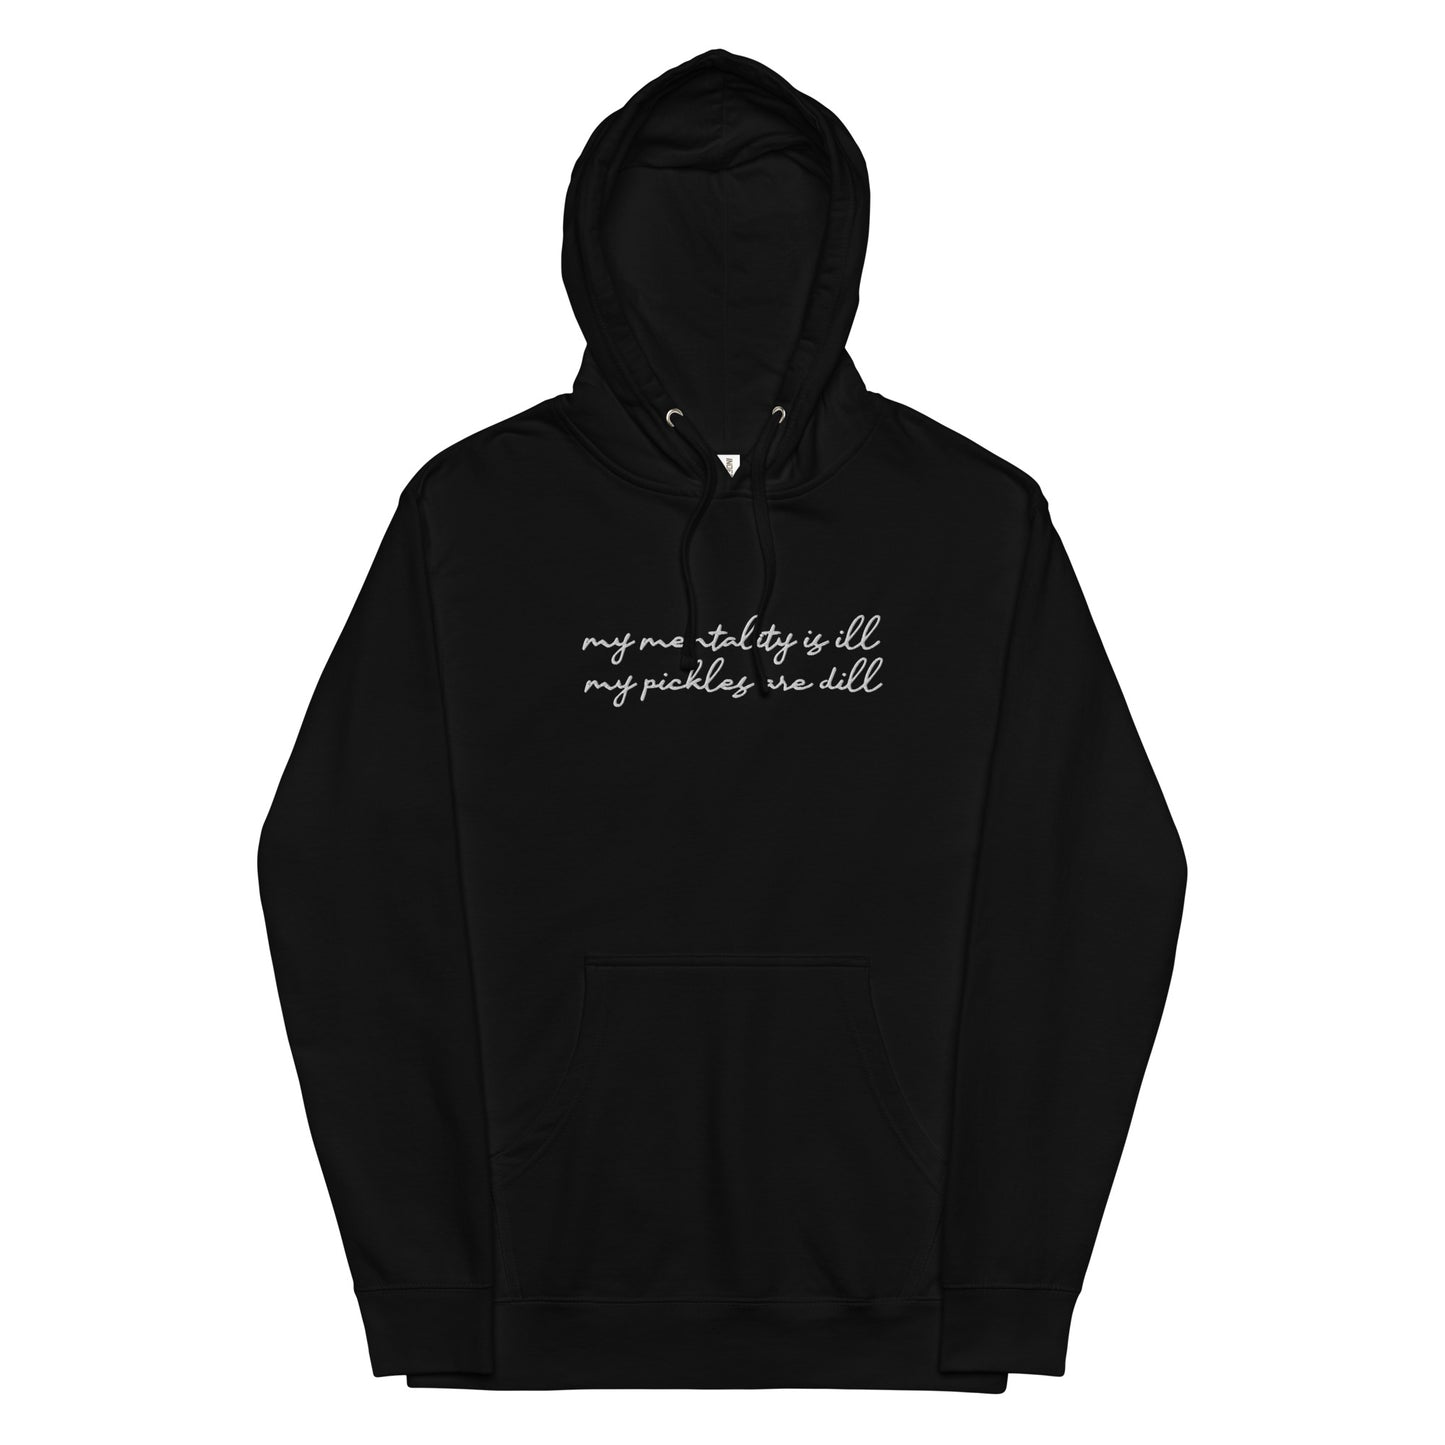 Mentality is Ill, Pickles are Dill (Embroidered) Unisex hoodie